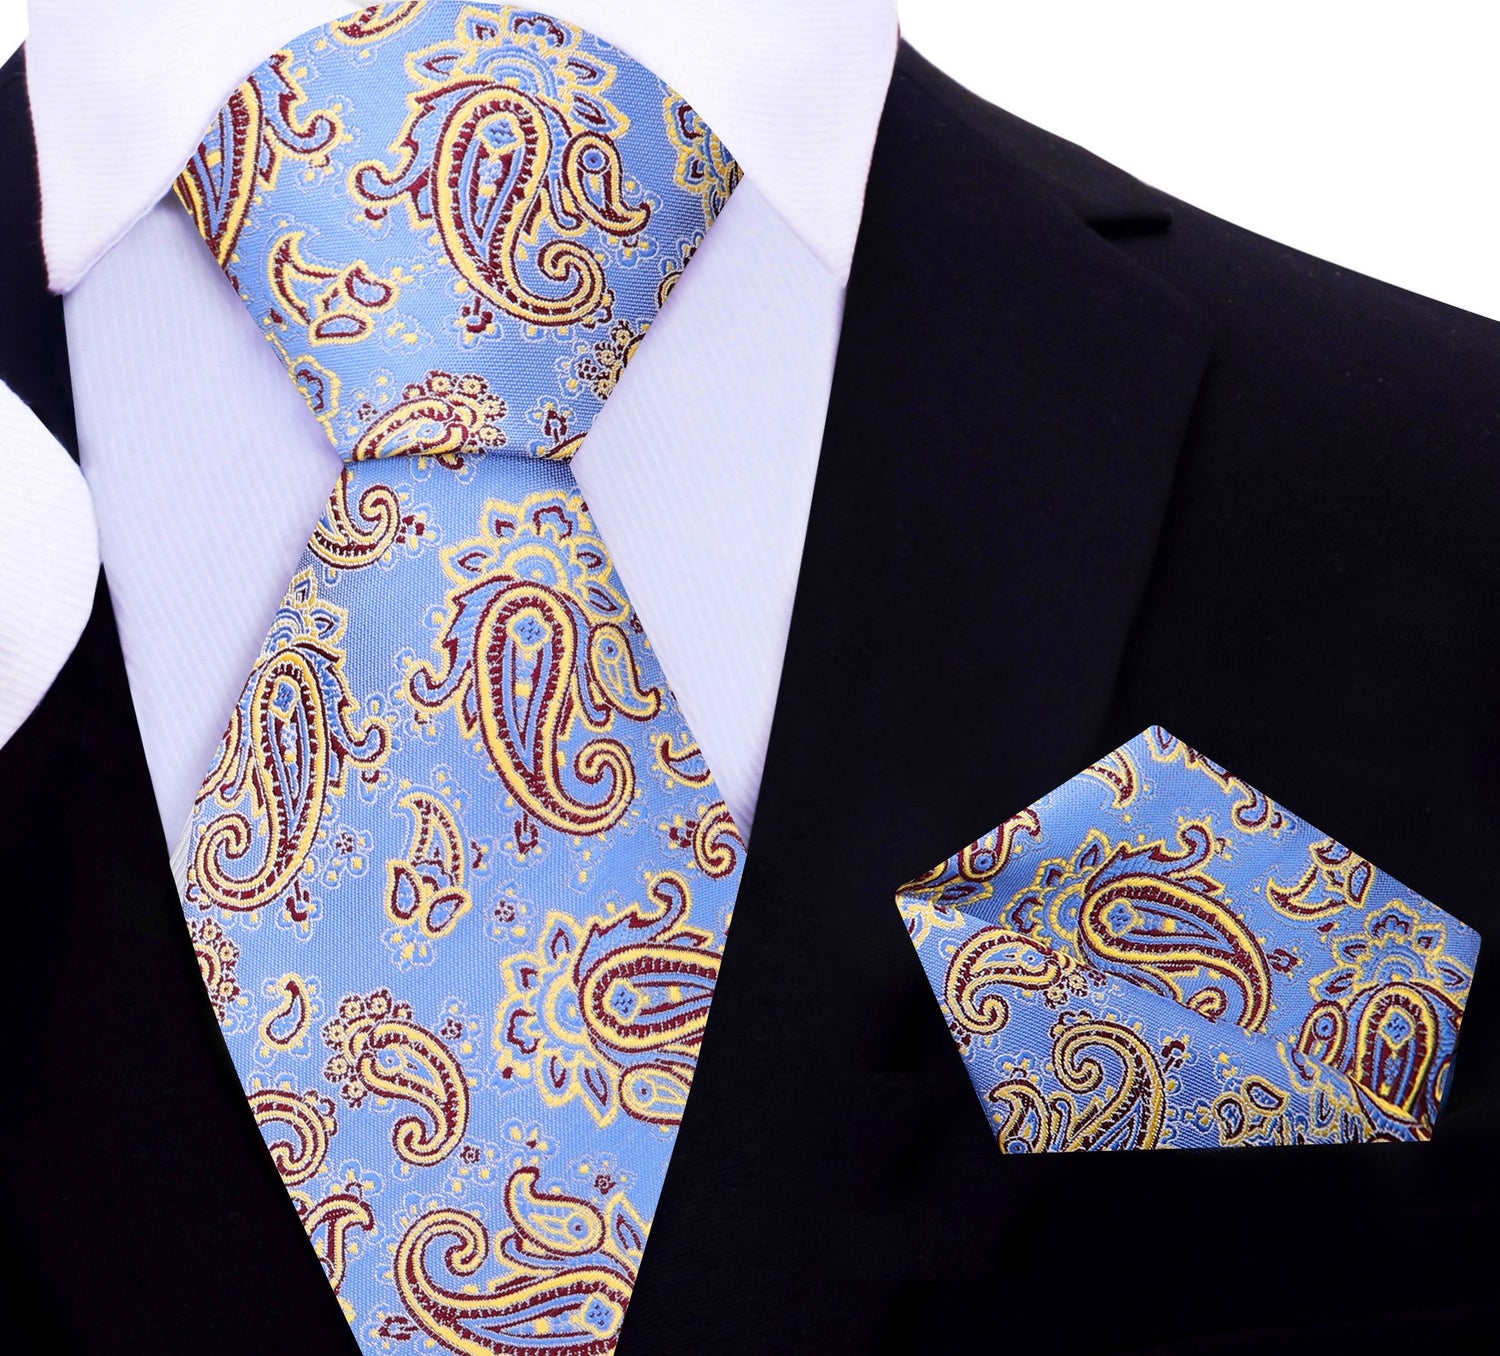 A Periwinkle, Gold, Burgundy Paisley Pattern Silk Necktie, Matching Pocket Square